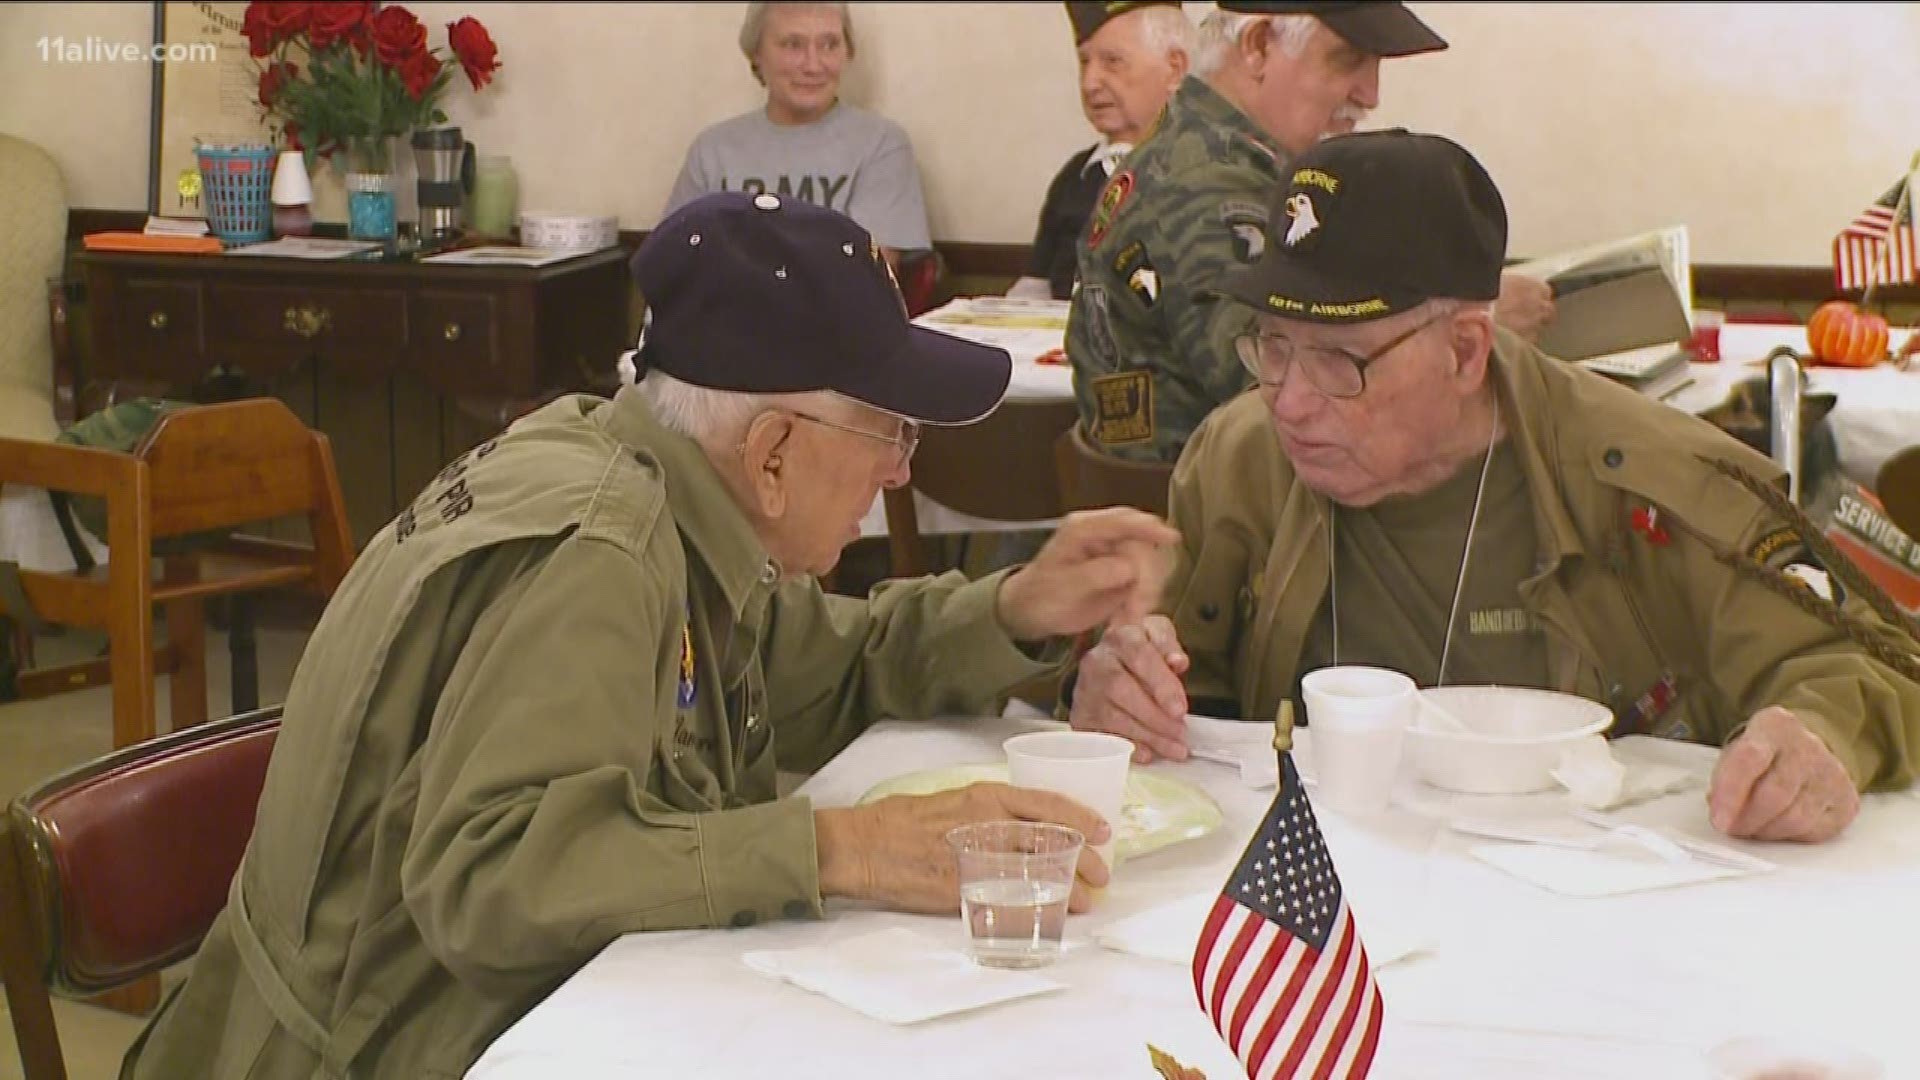 They reunited every year in Toccoa for Currahee Military Weekend, even as both reached their mid-90s.